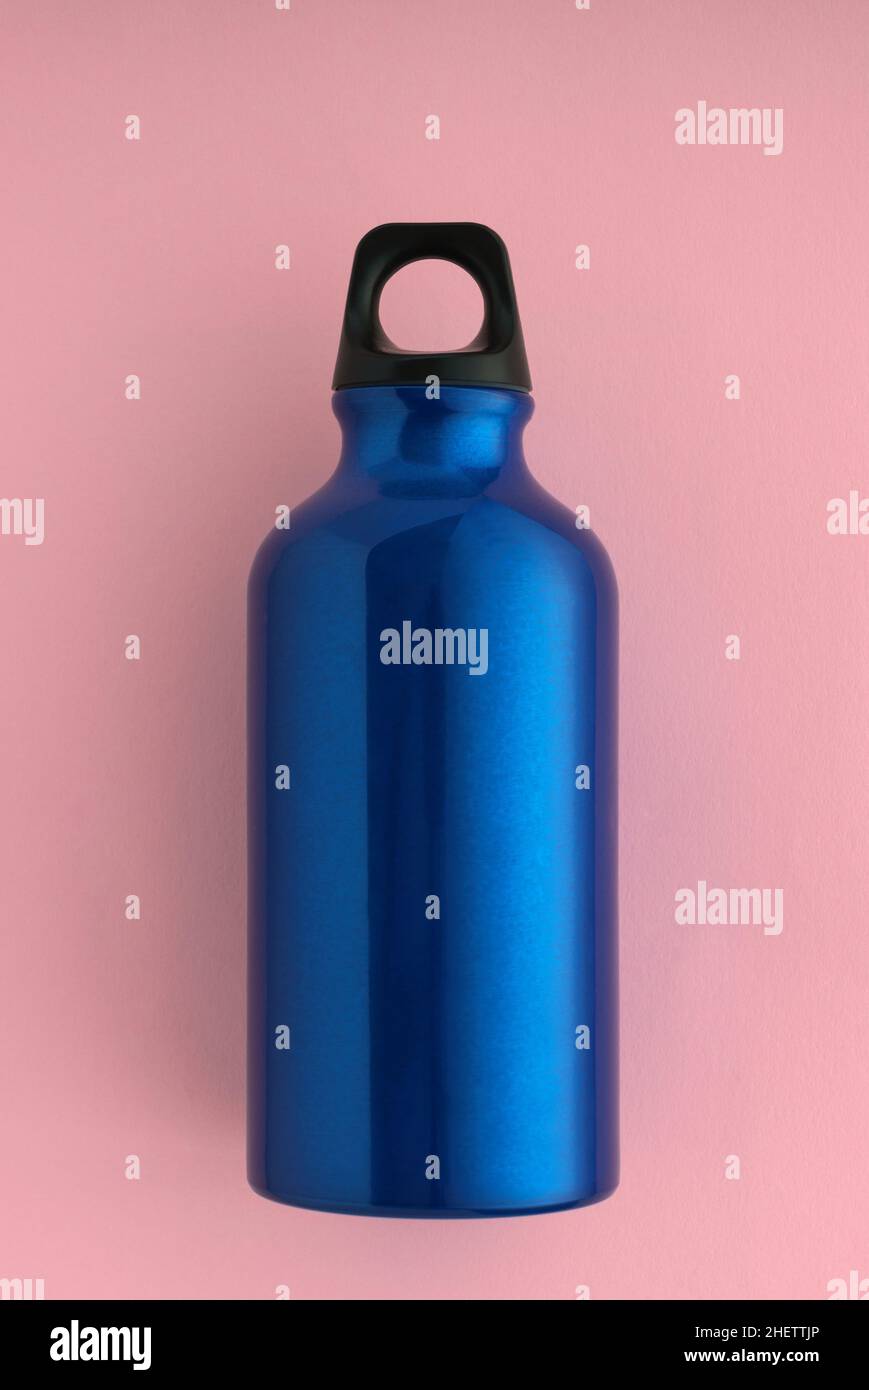 Top view of aluminum sport water bottle on pink background Stock Photo